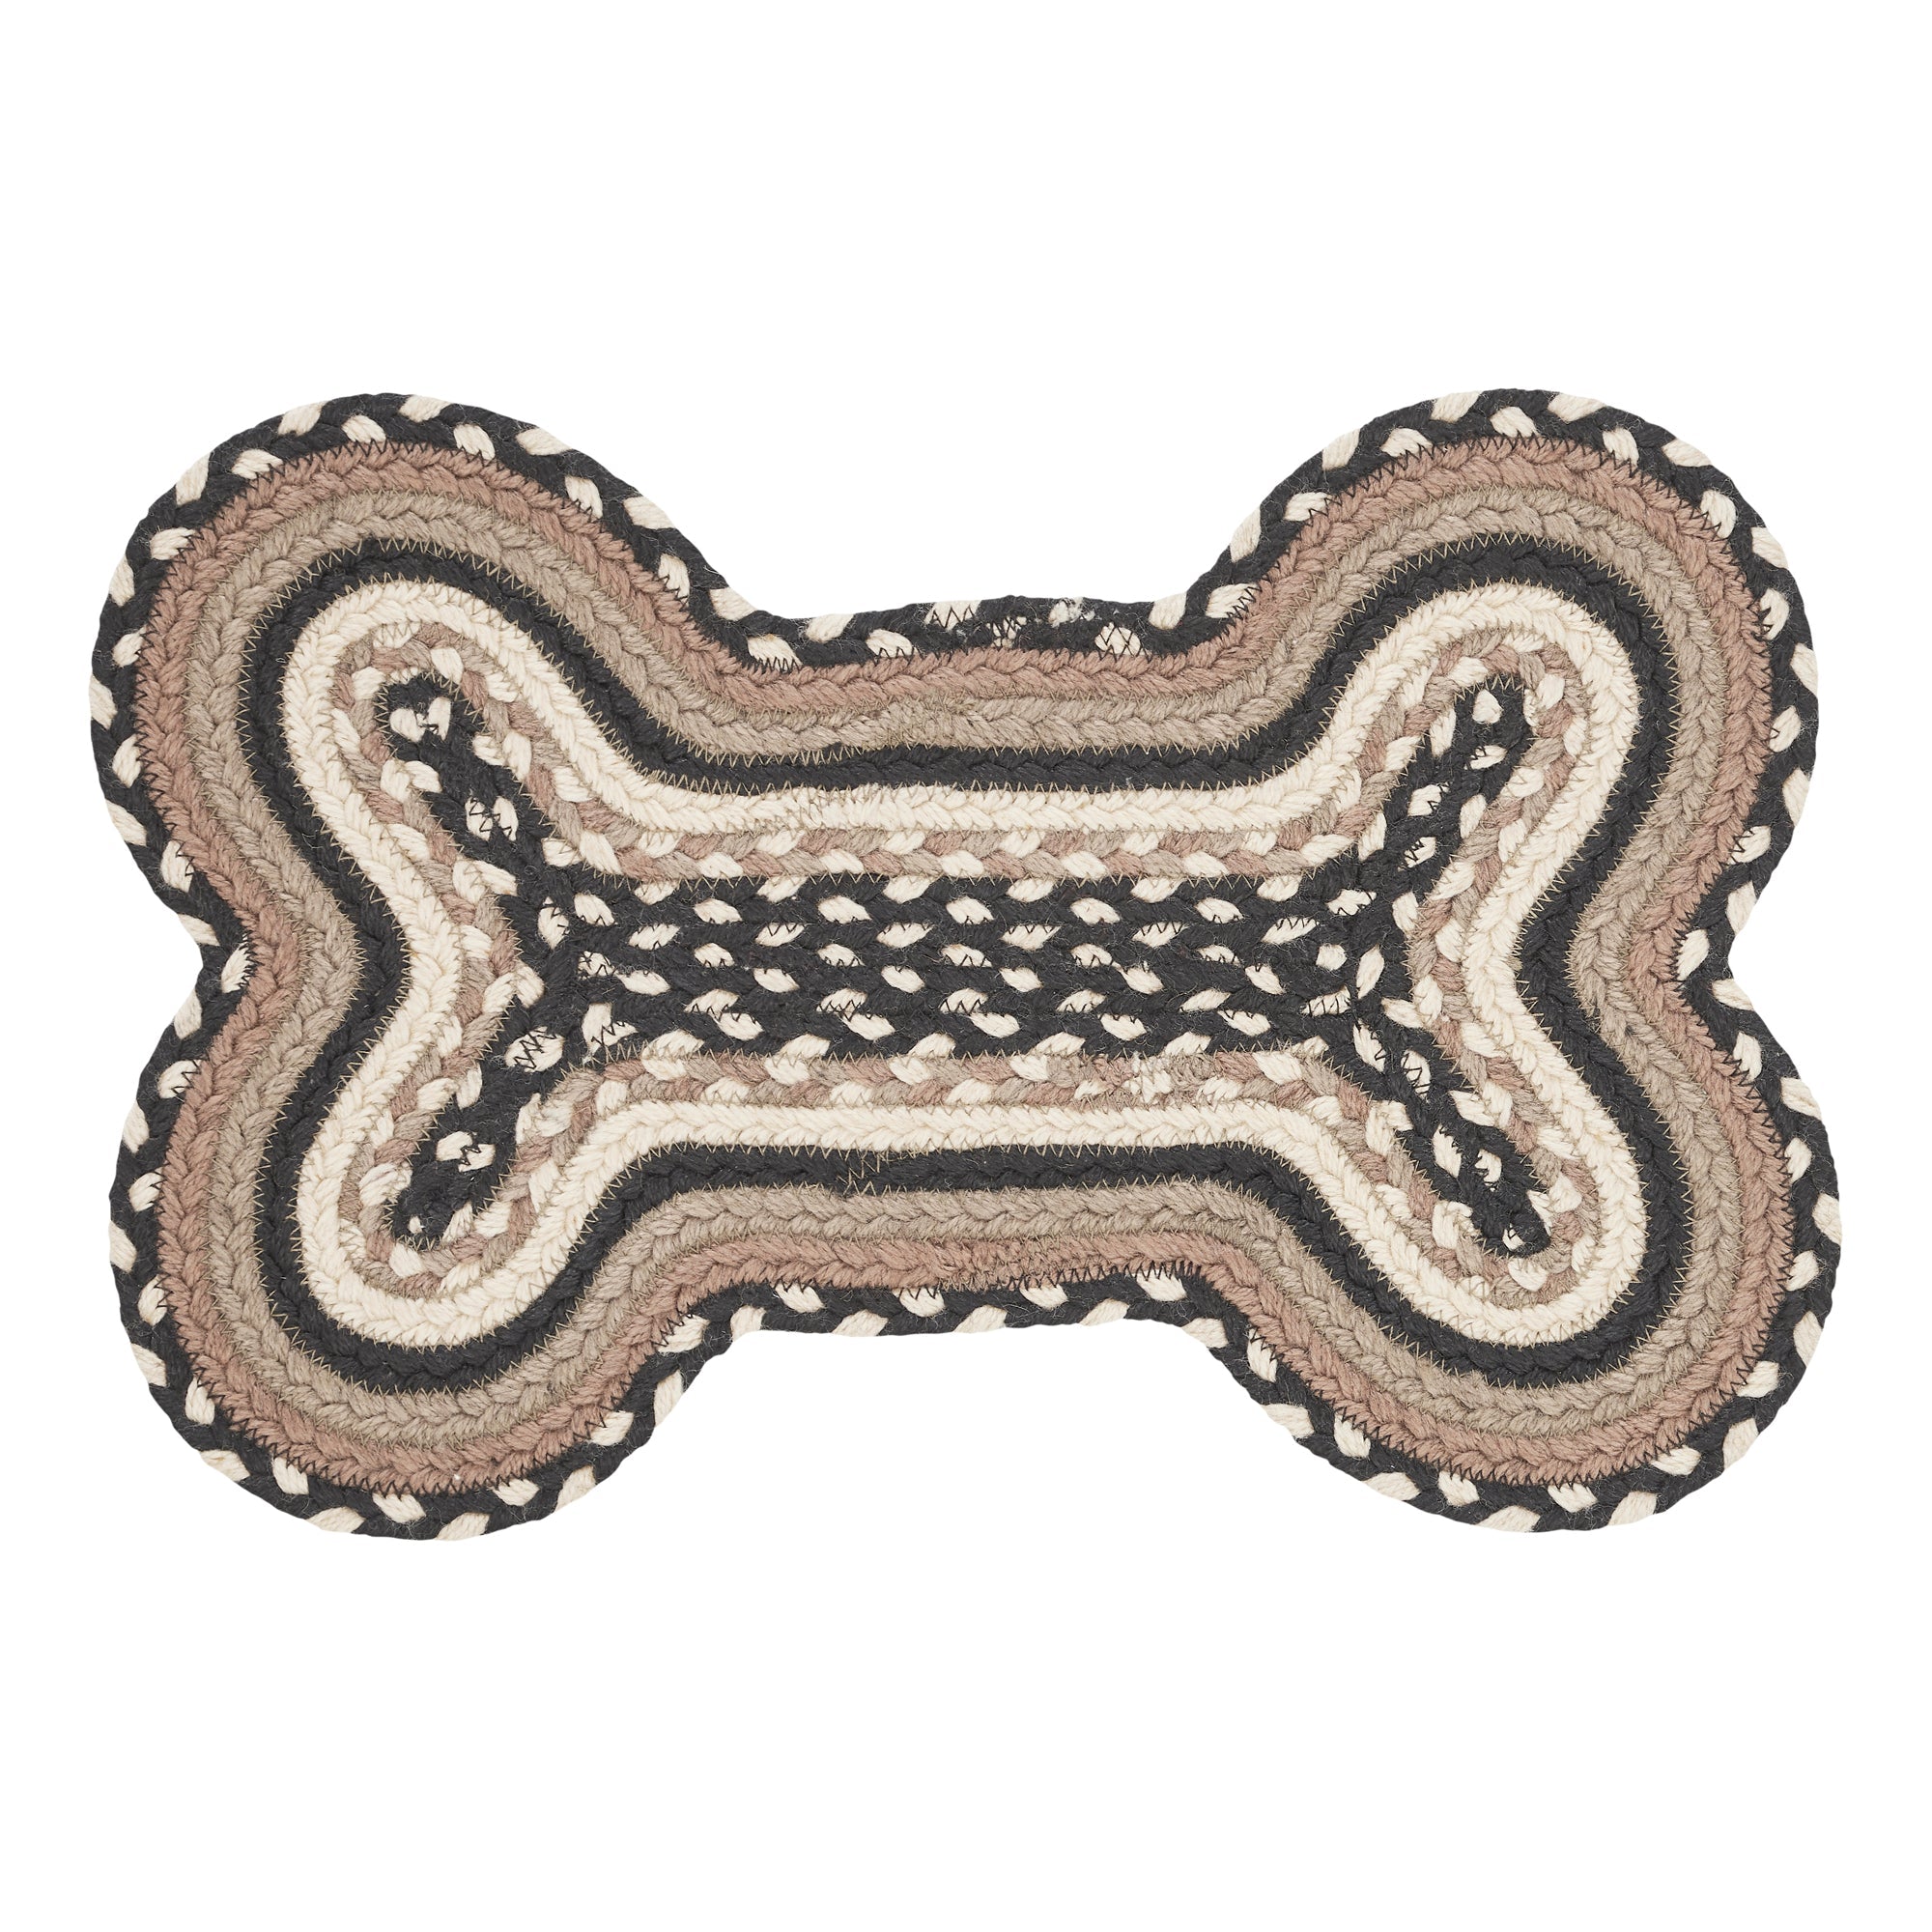 Sawyer Mill Charcoal Creme Indoor/Outdoor Small Bone Braided Rug 11.5"x17.5" VHC Brands